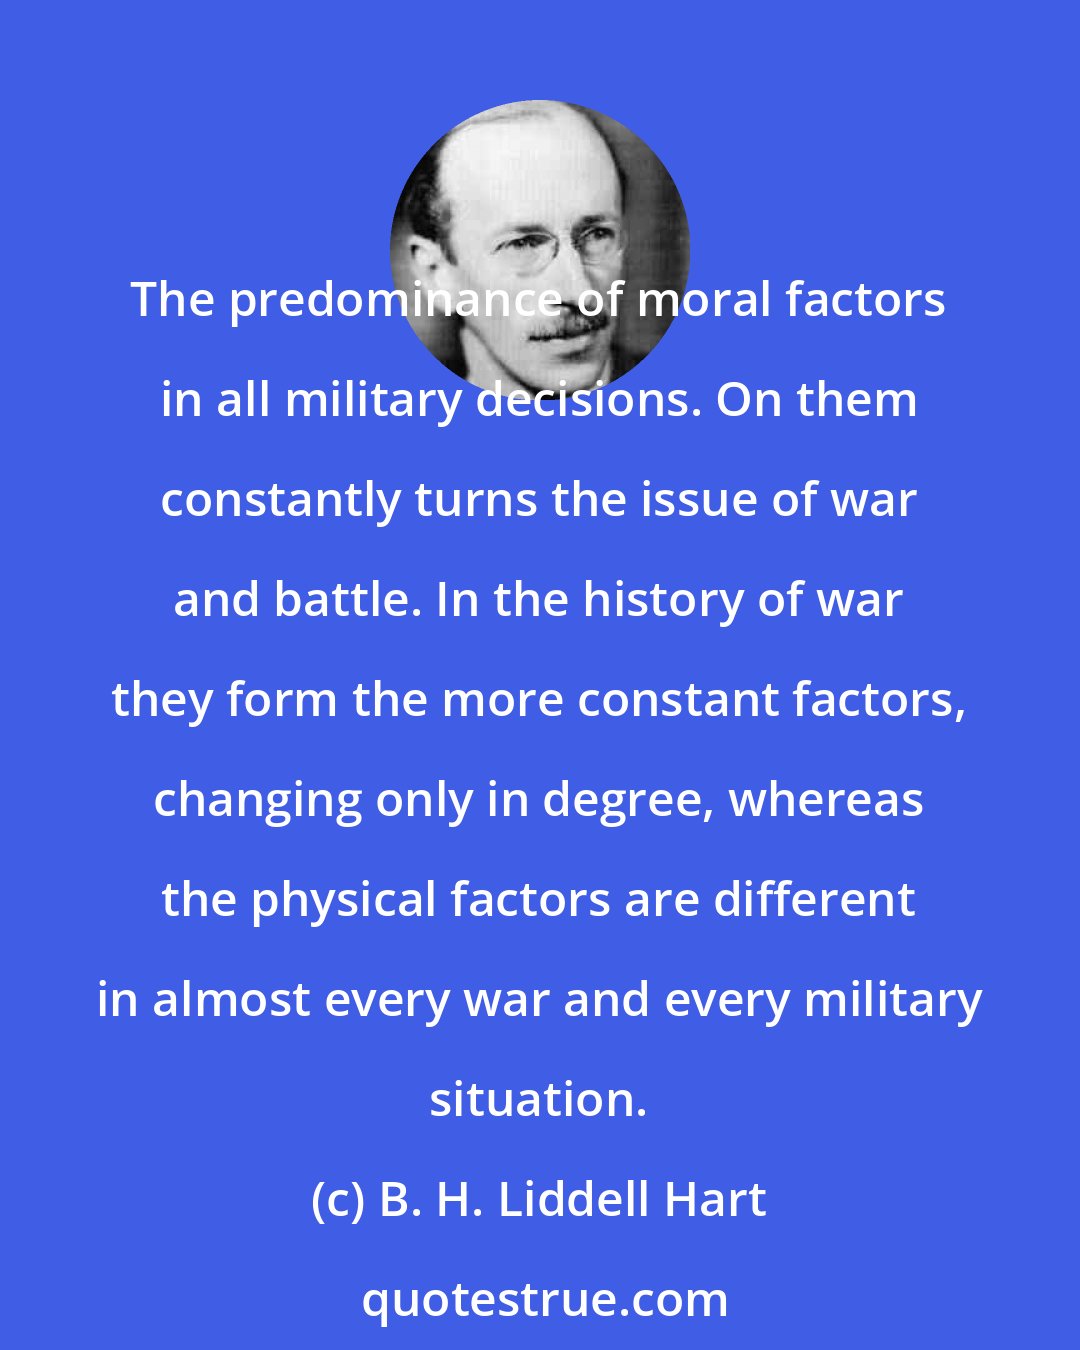 B. H. Liddell Hart: The predominance of moral factors in all military decisions. On them constantly turns the issue of war and battle. In the history of war they form the more constant factors, changing only in degree, whereas the physical factors are different in almost every war and every military situation.